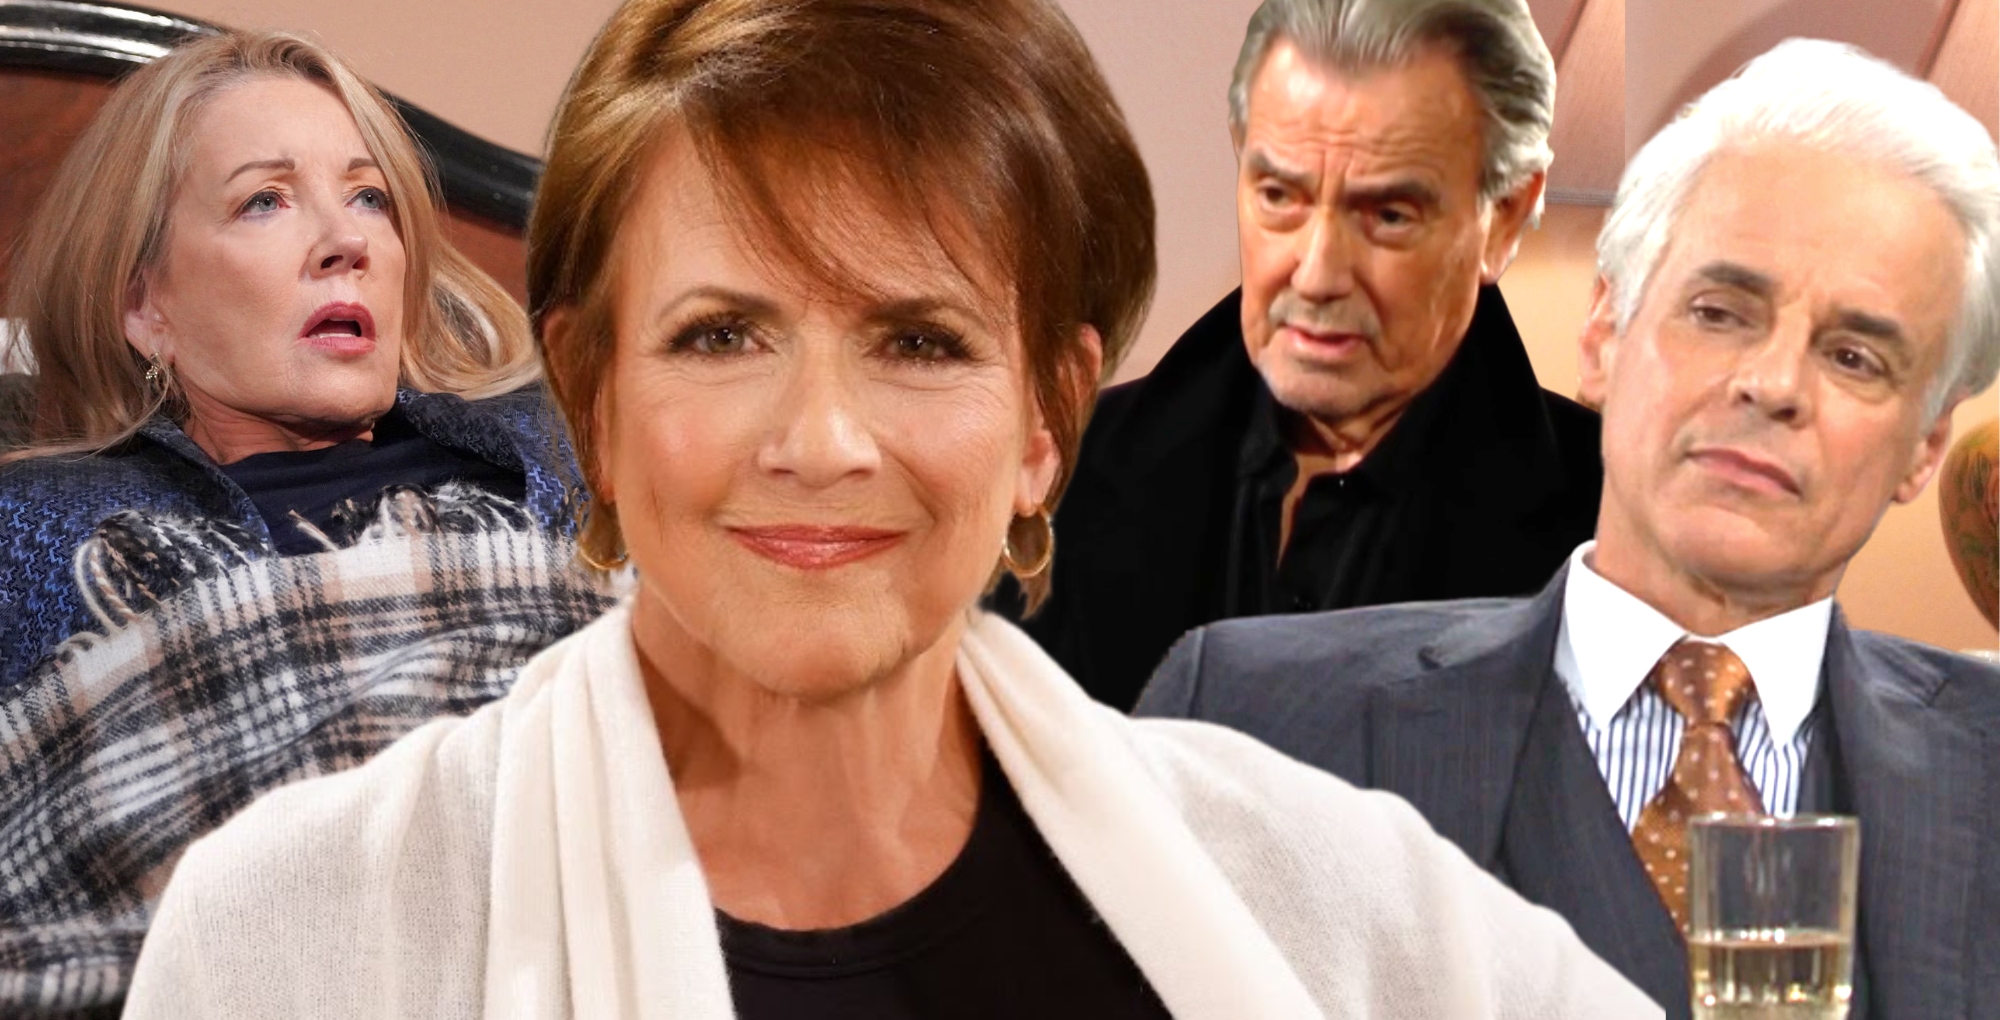 colleen zenk talks christian le blanc and young and the restless storyline with nikki and victor.